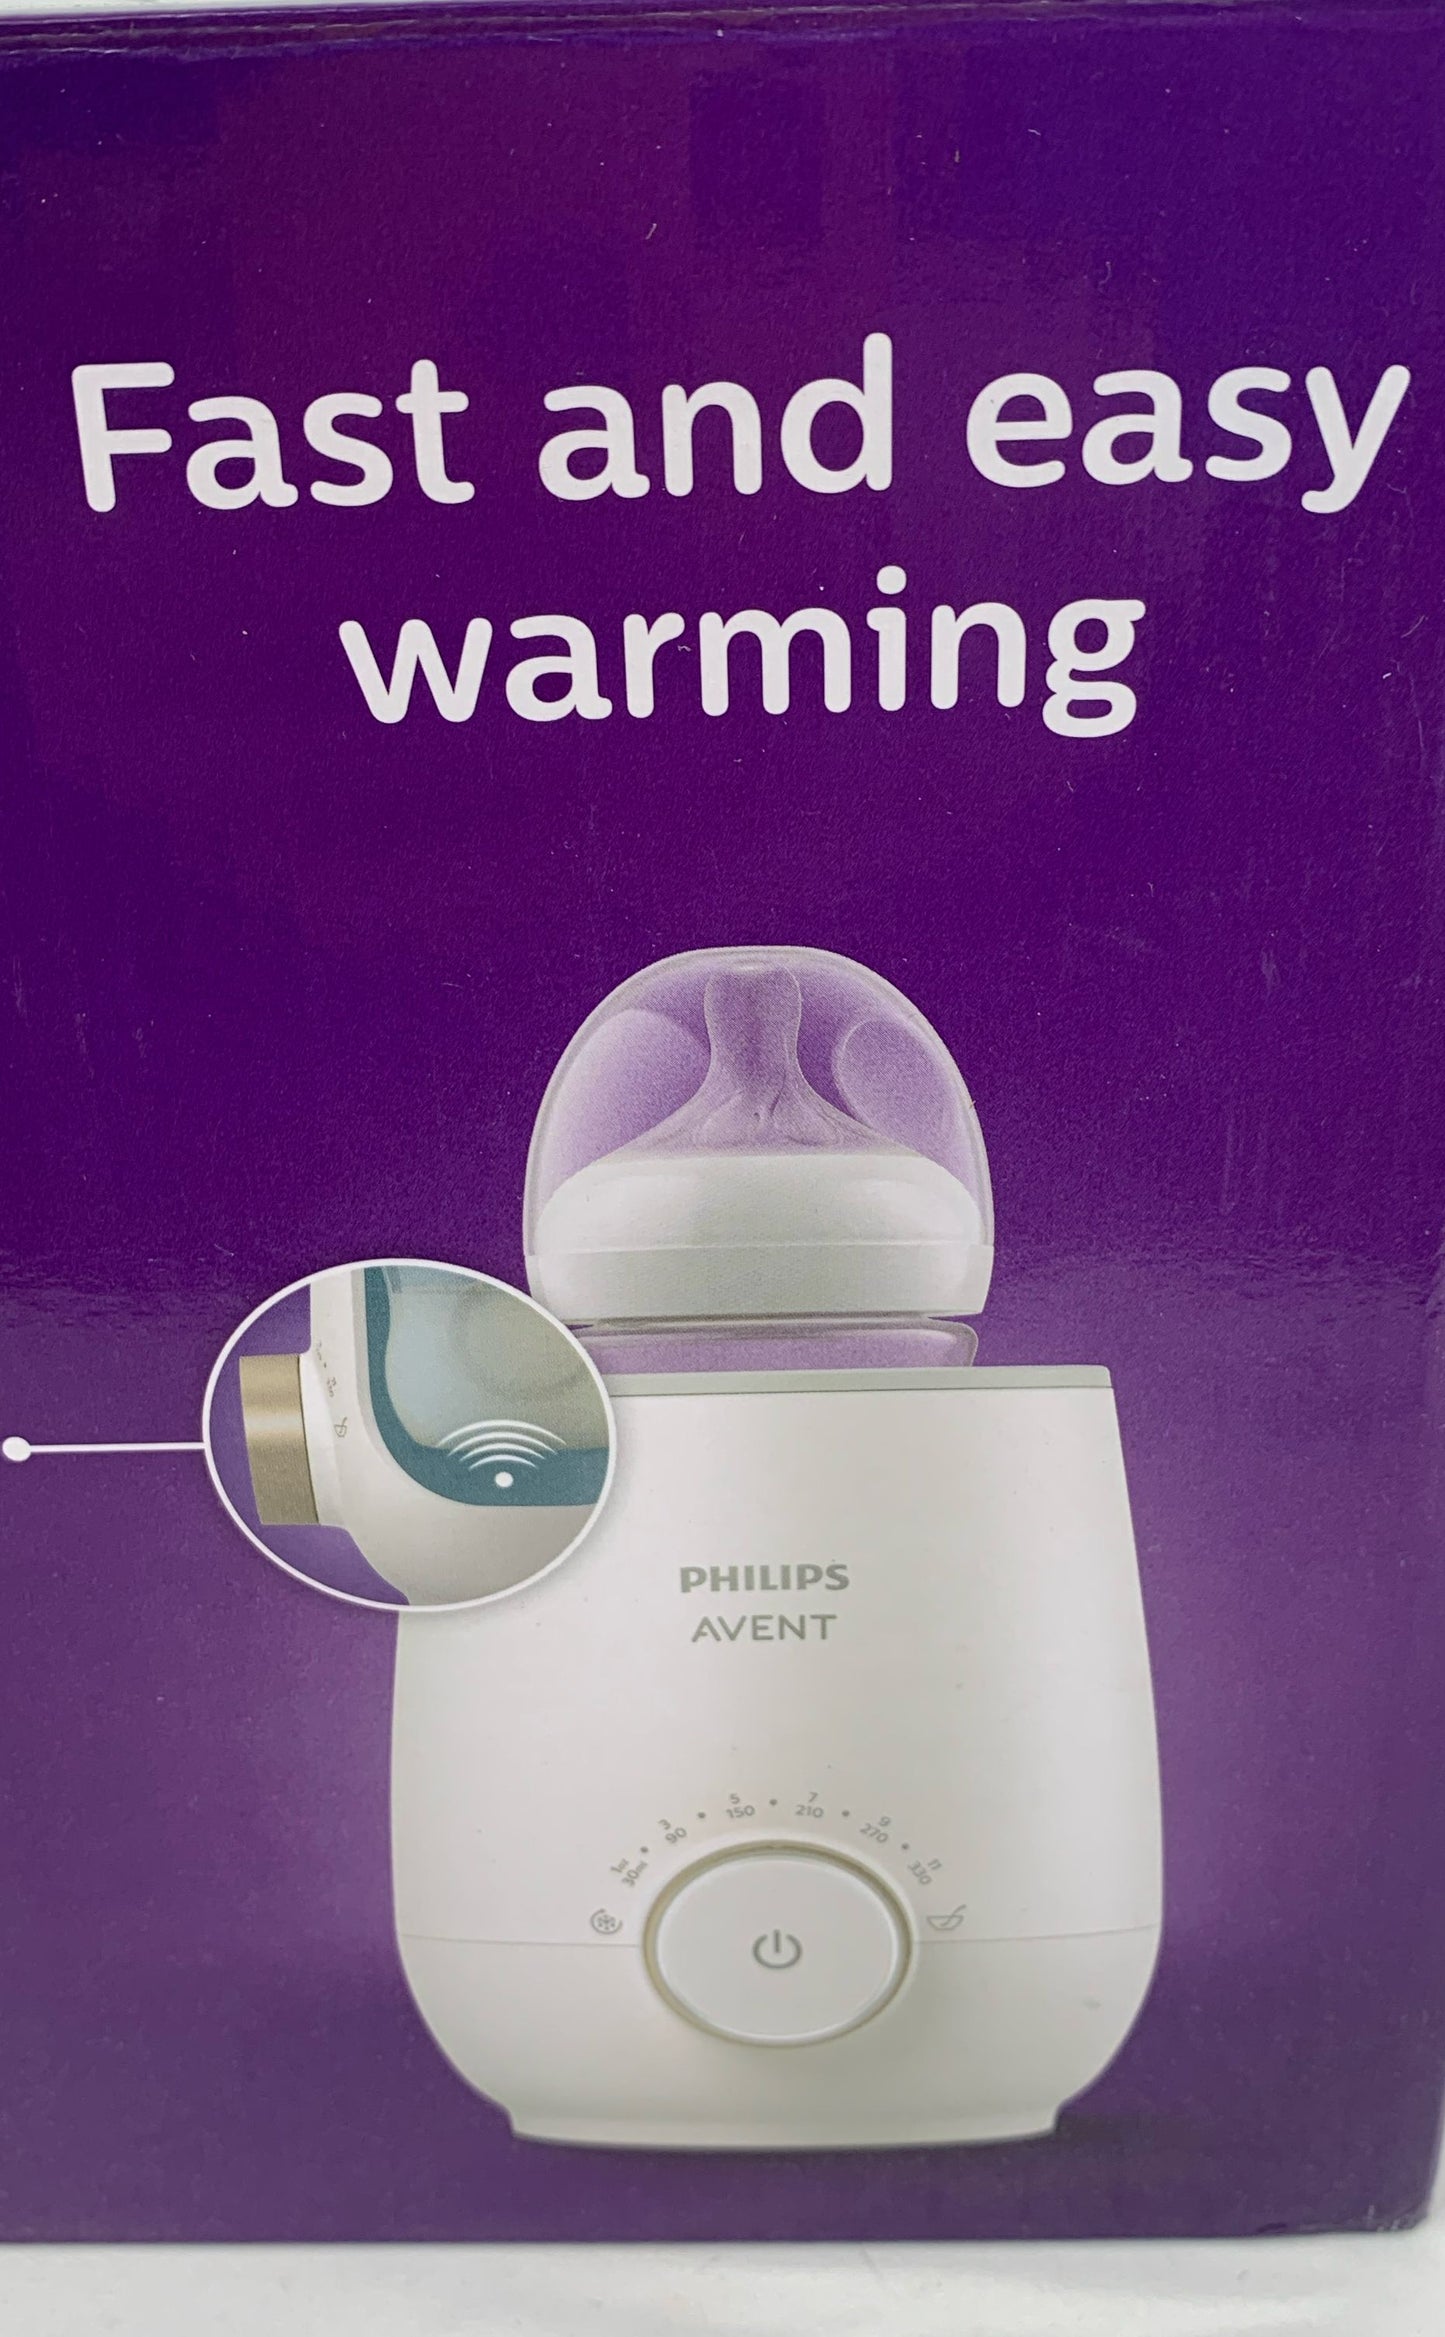 Philips Avent Fast And Easy Warming Fast Bottle Warmer Premium